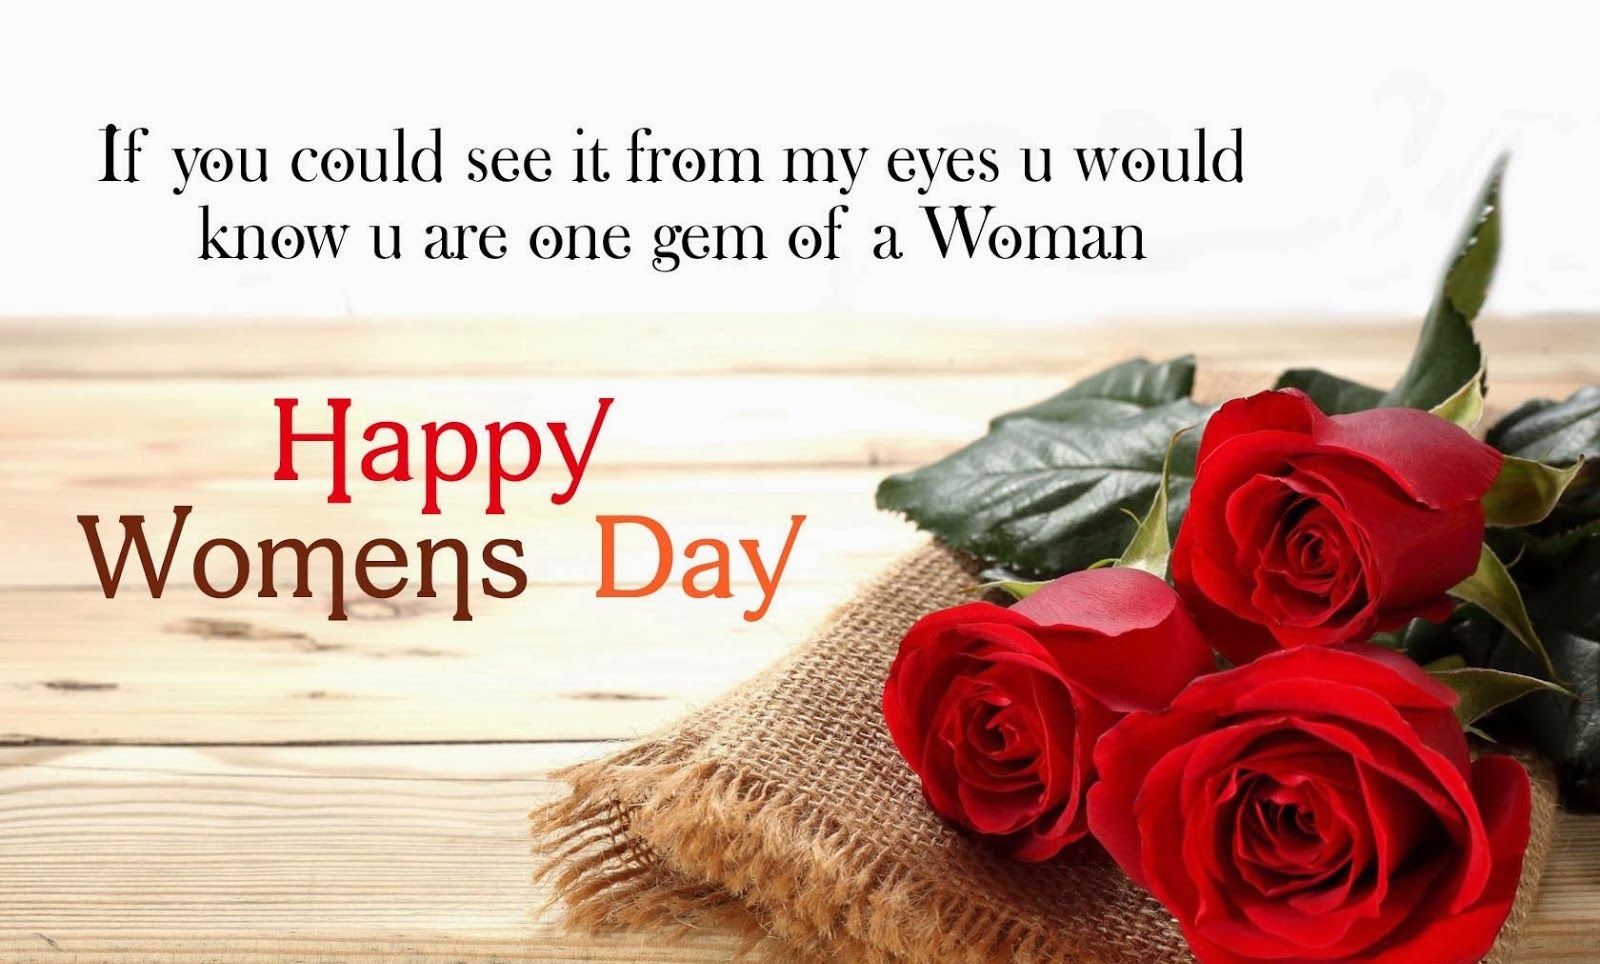 Happy Women s Day Wishes and quotes